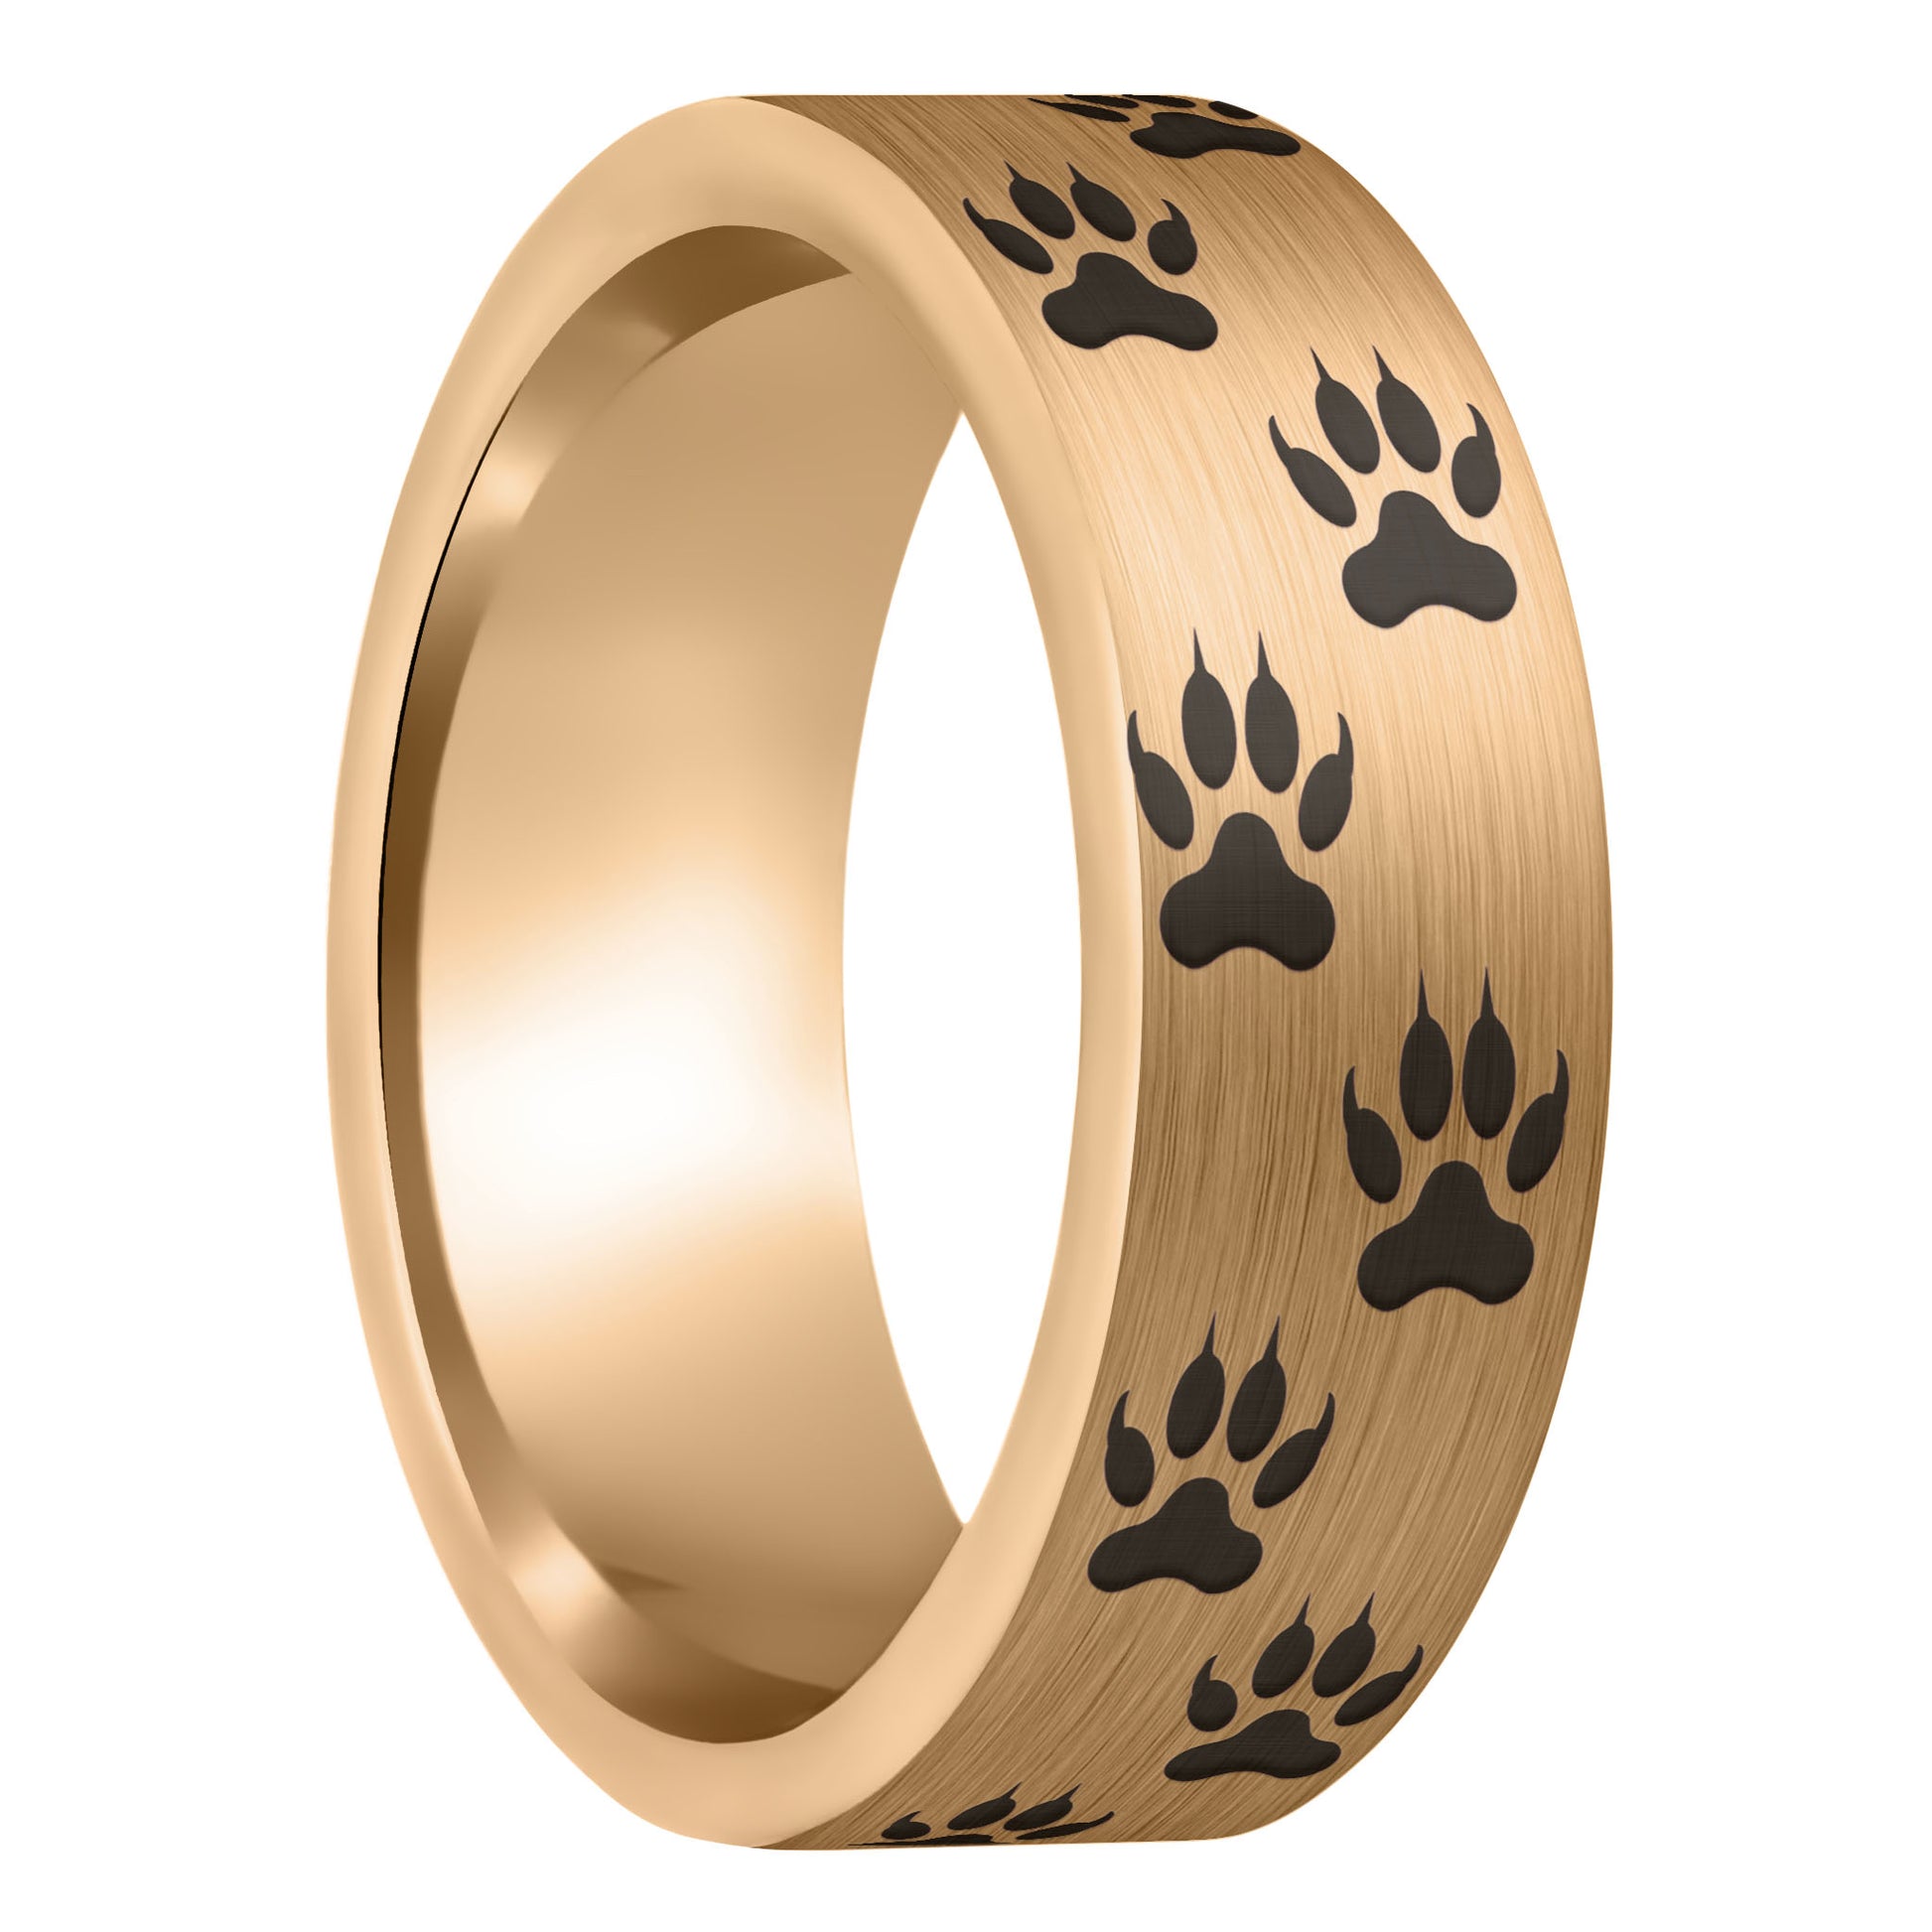 A wolf tracks brushed rose gold tungsten men's wedding band displayed on a plain white background.